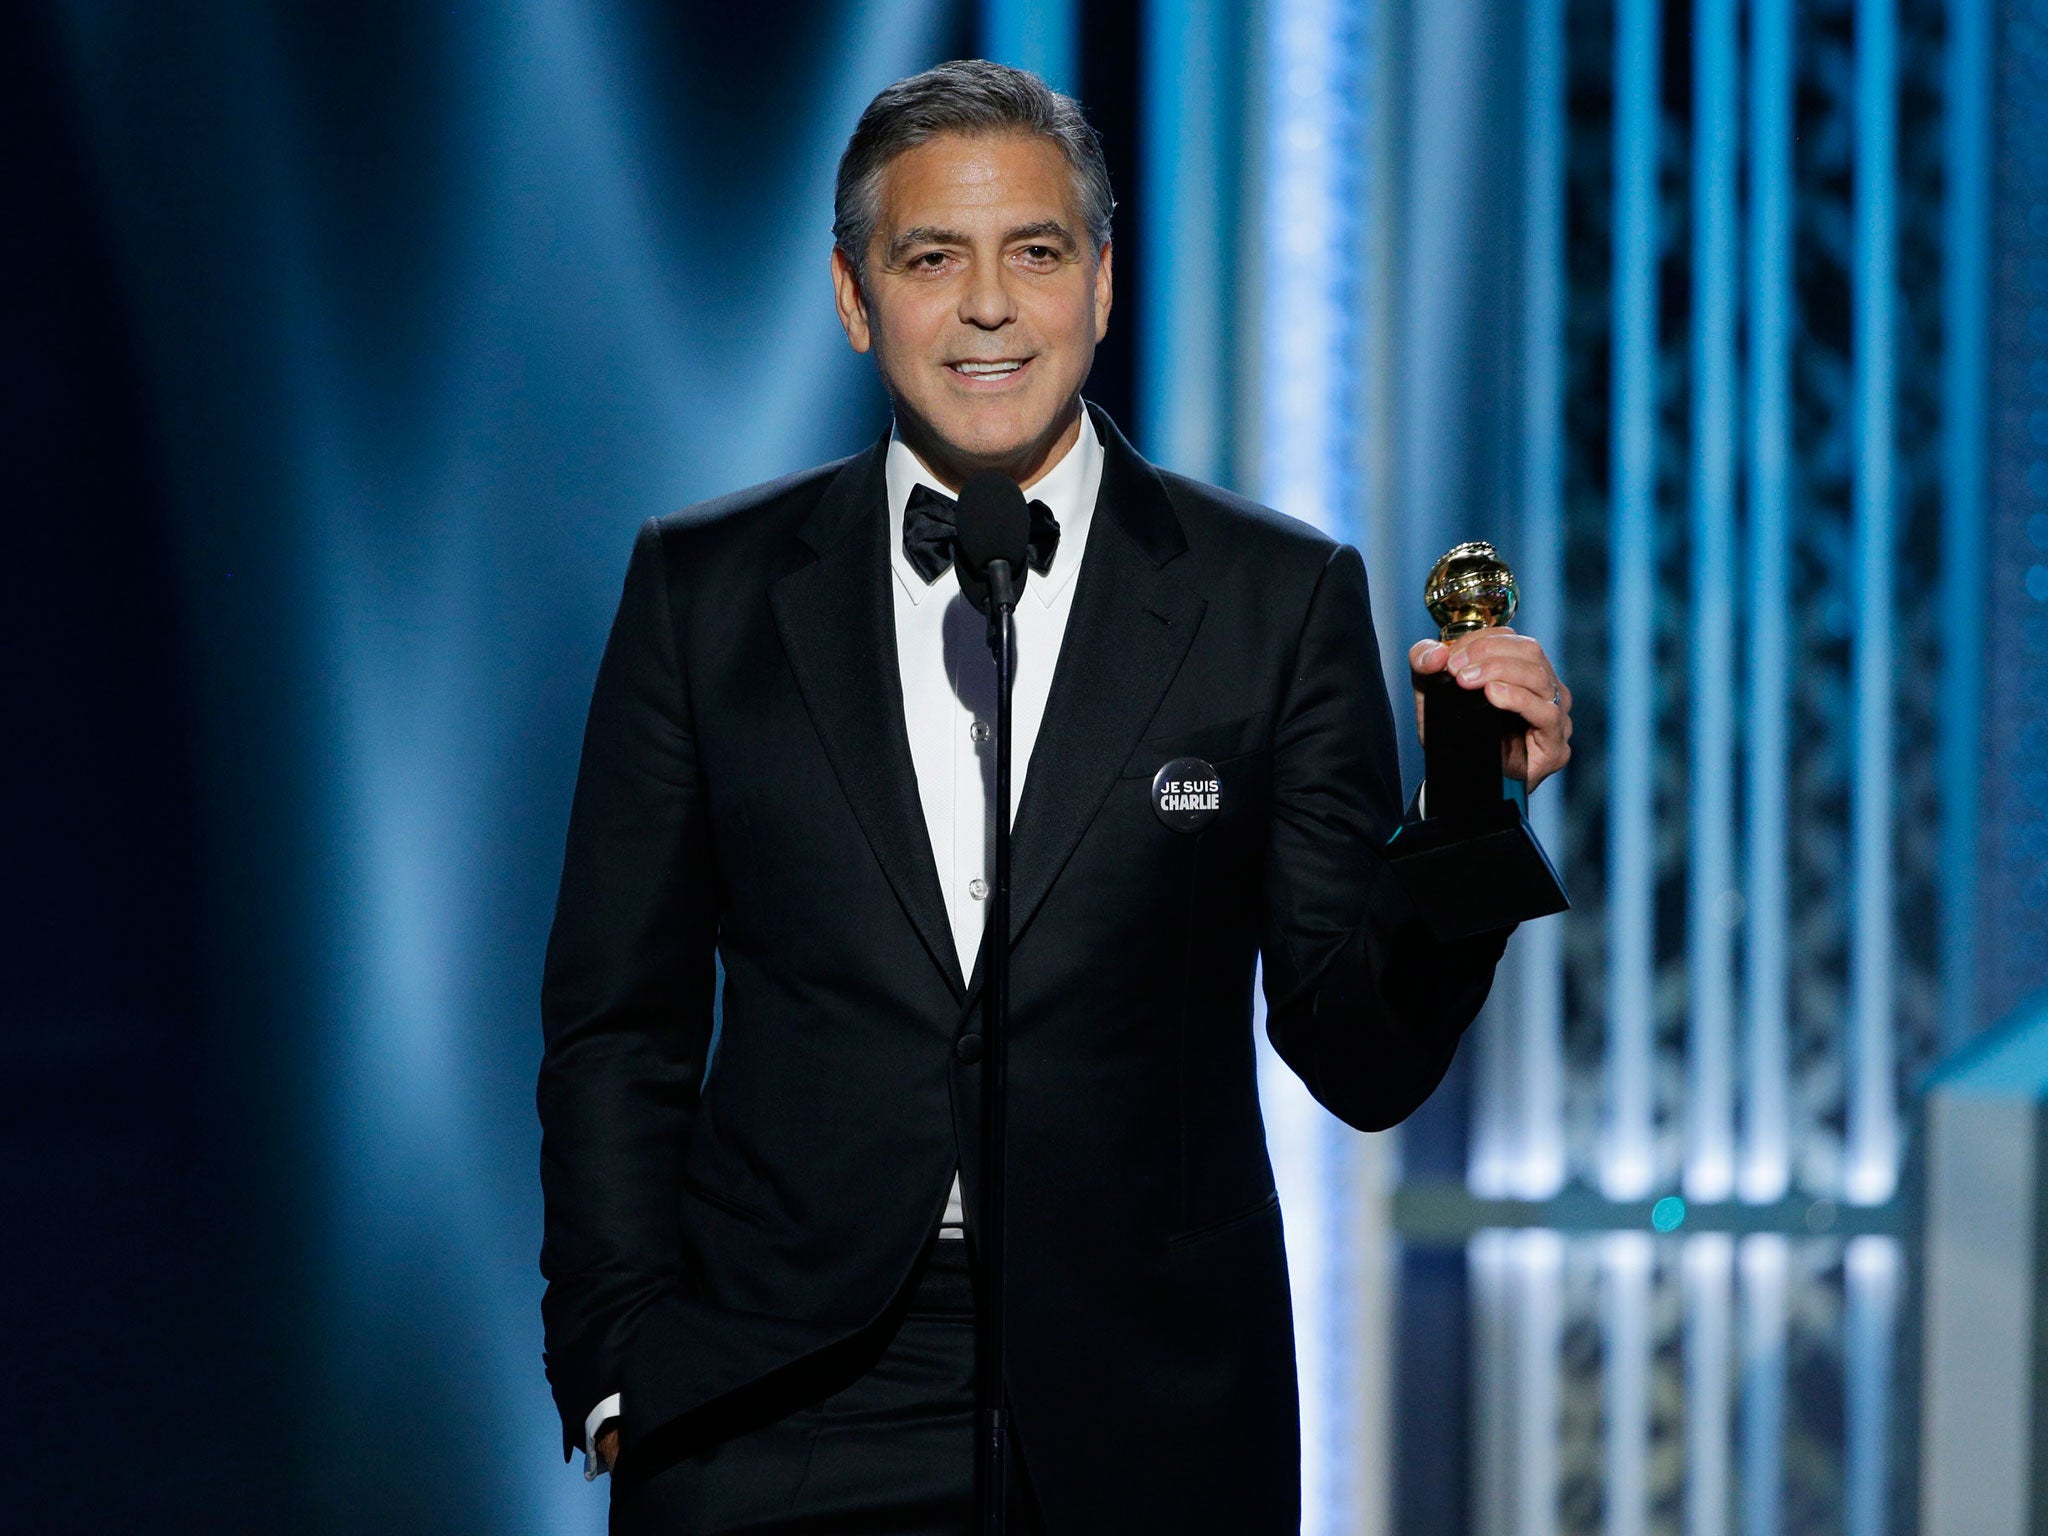 George Clooney accepts the Cecil B DeMille lifetime achievement award acceptance speech at the 2015 Golden Globes